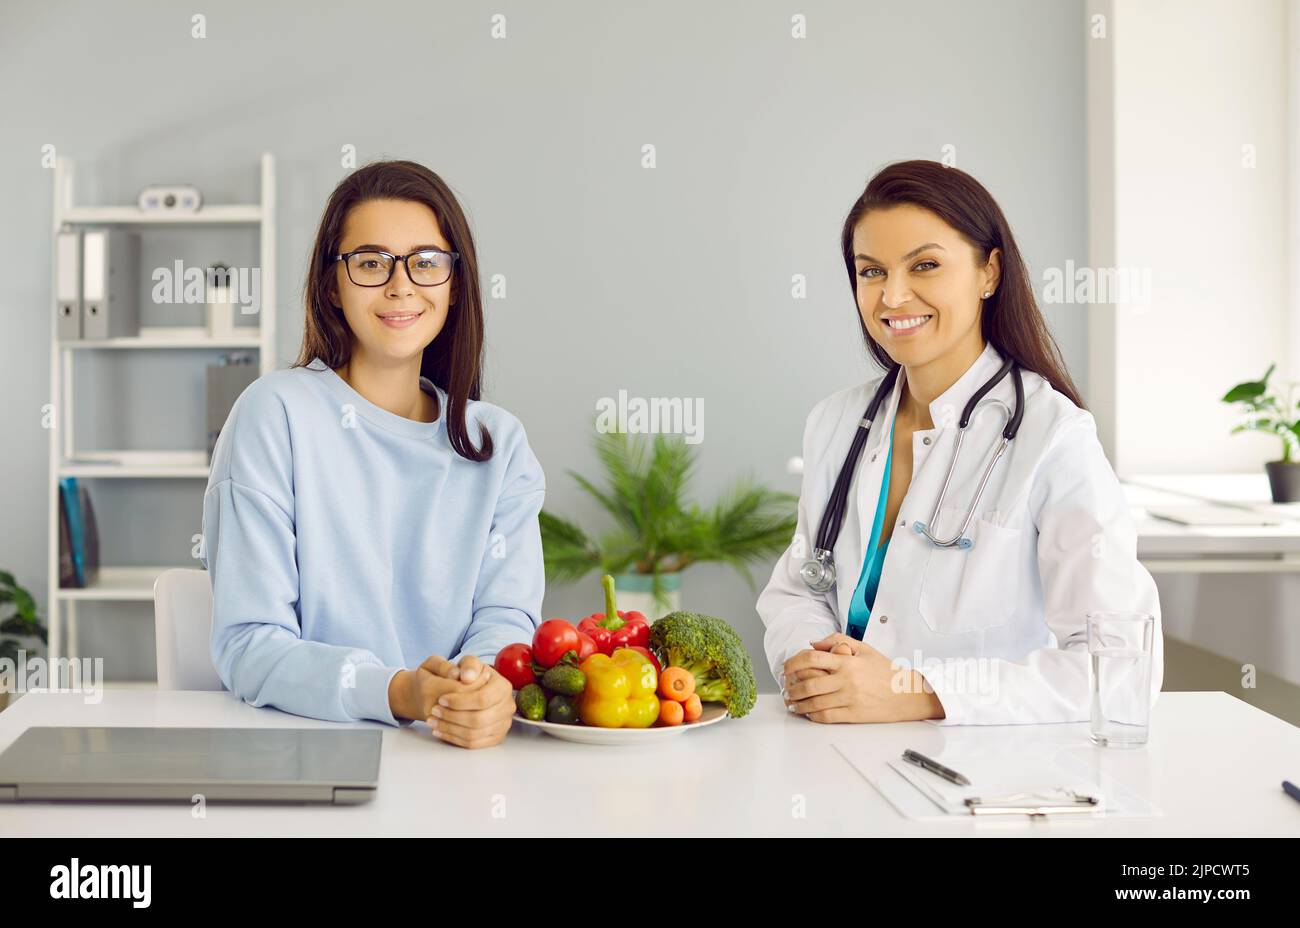 Professional dietitian or nutritionist giving consultation about healthy food to young woman Stock Photo